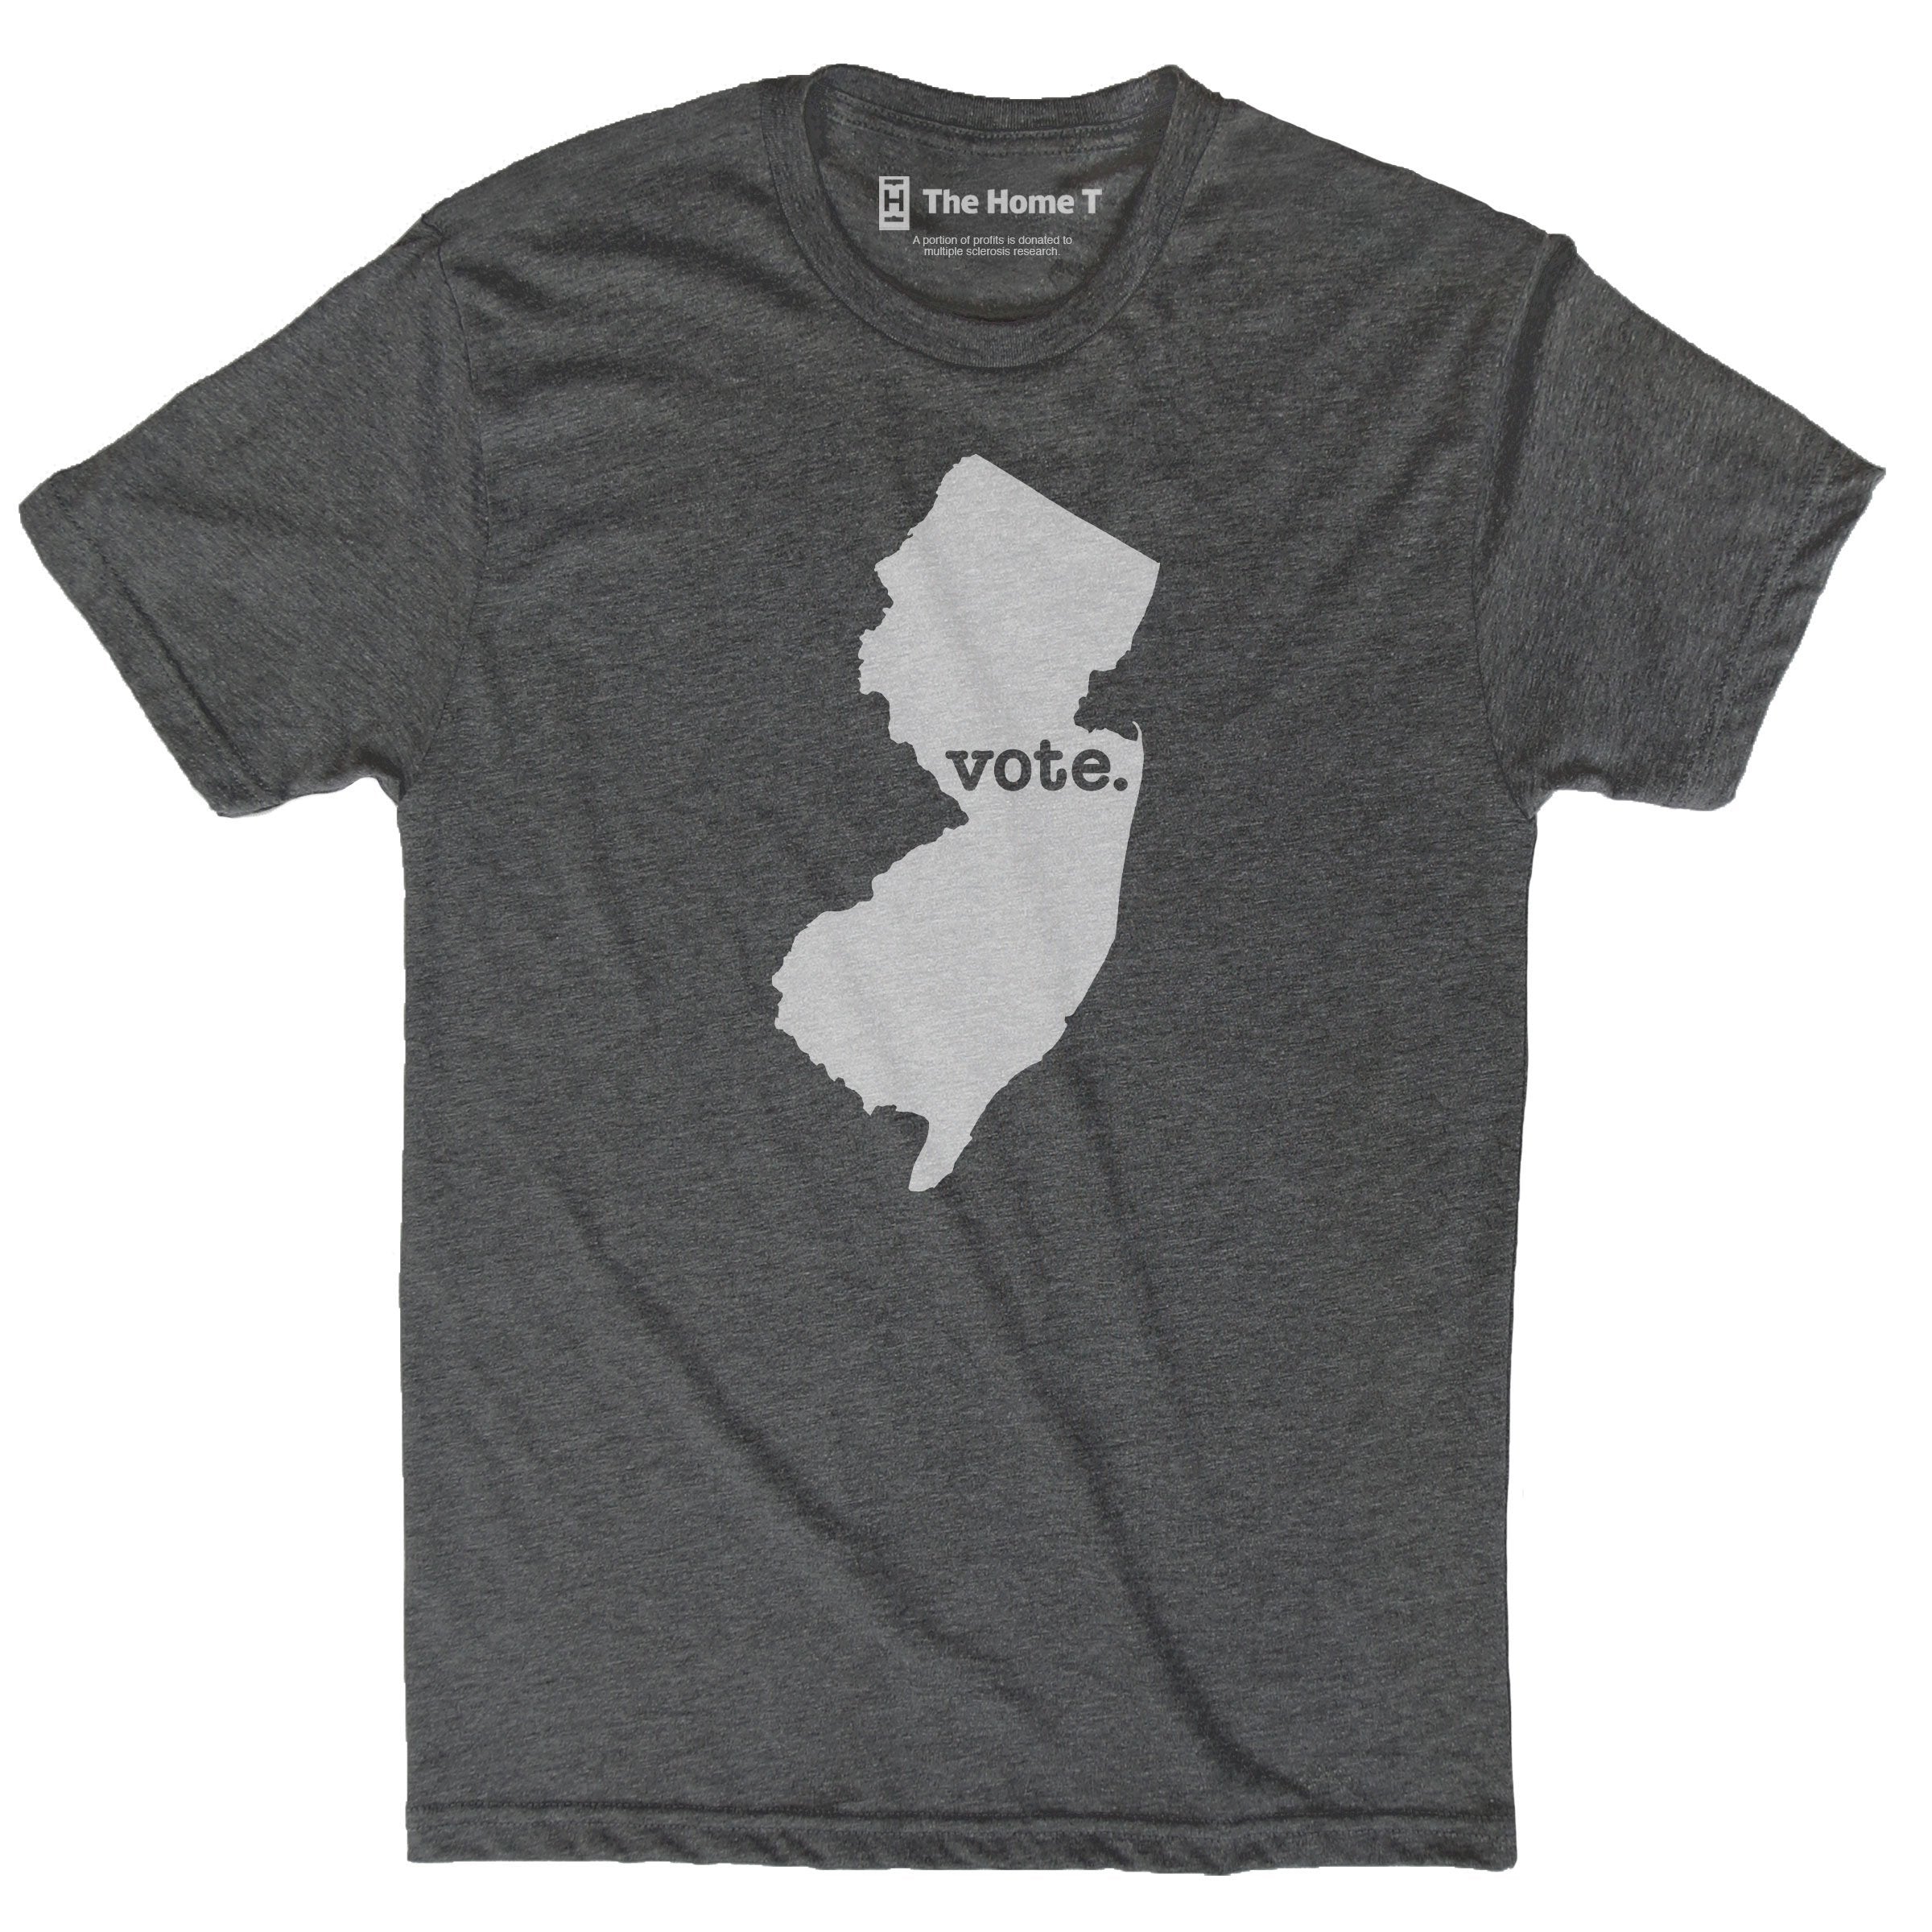 New Jersey Vote Home T Vote The Home T XS Grey